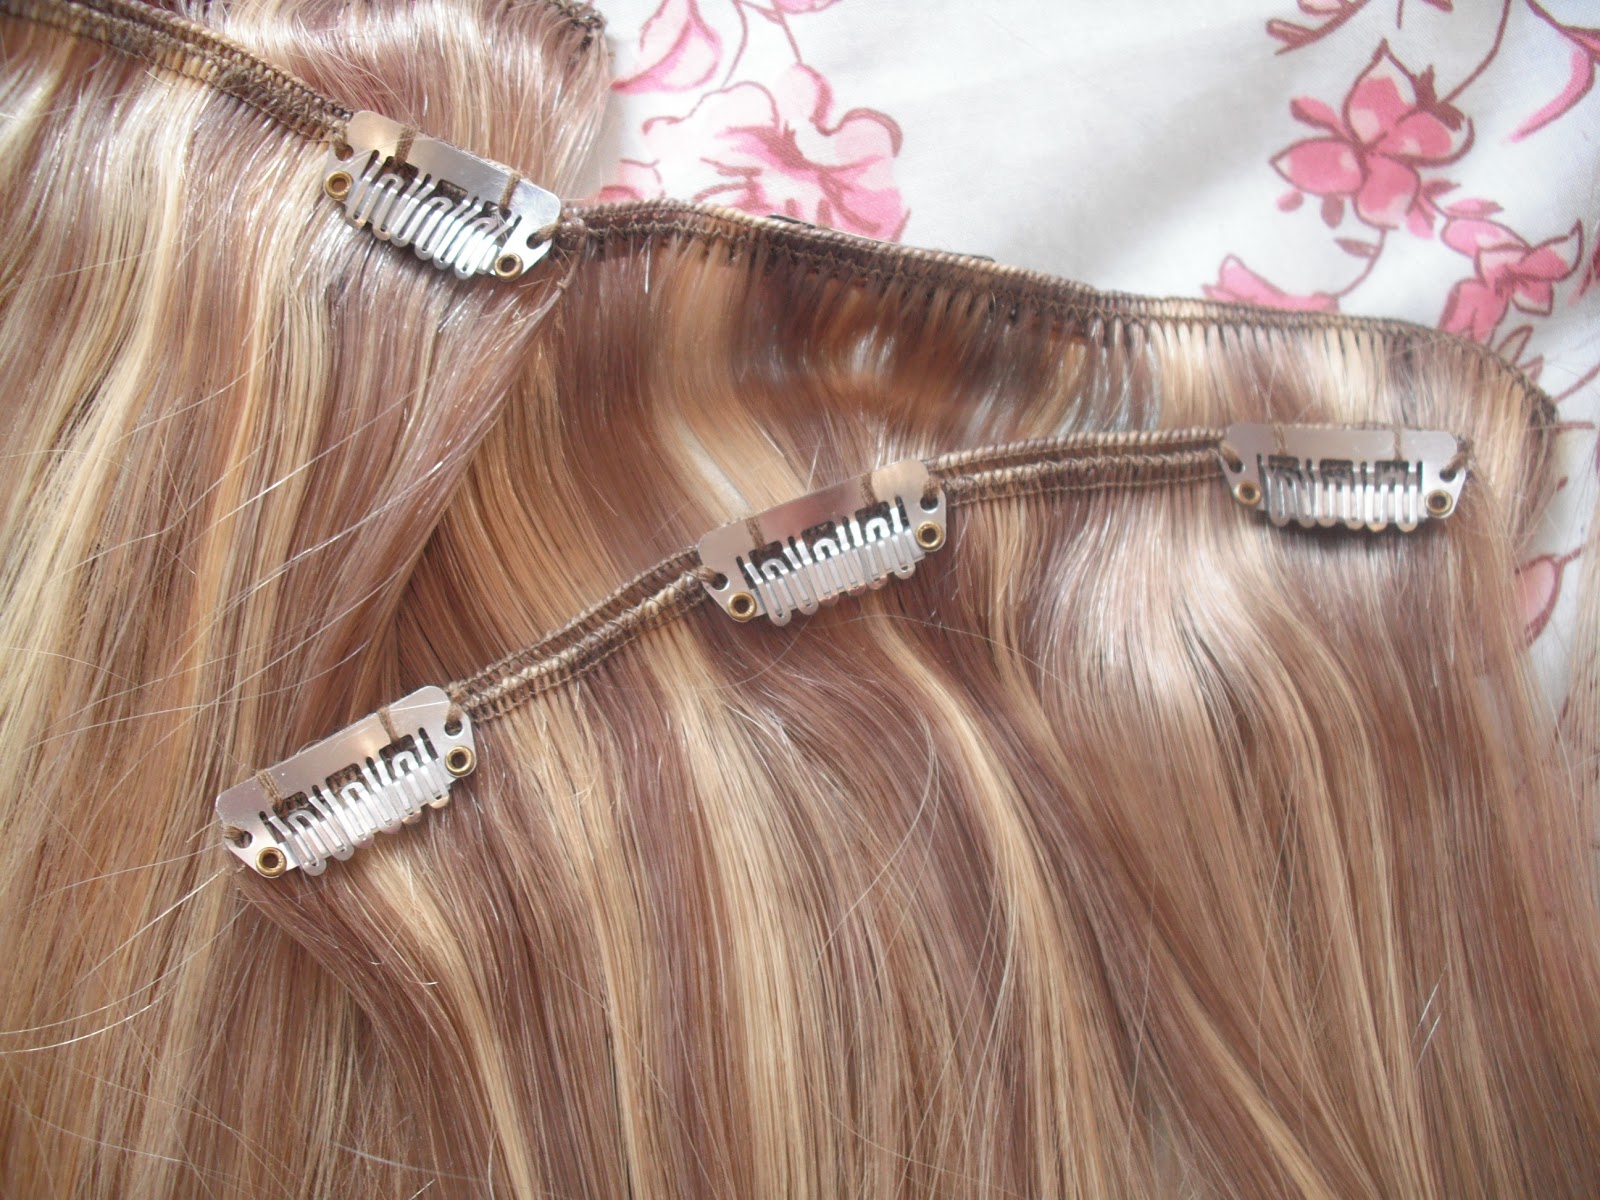 5. Clip-in Hair Extensions - wide 1